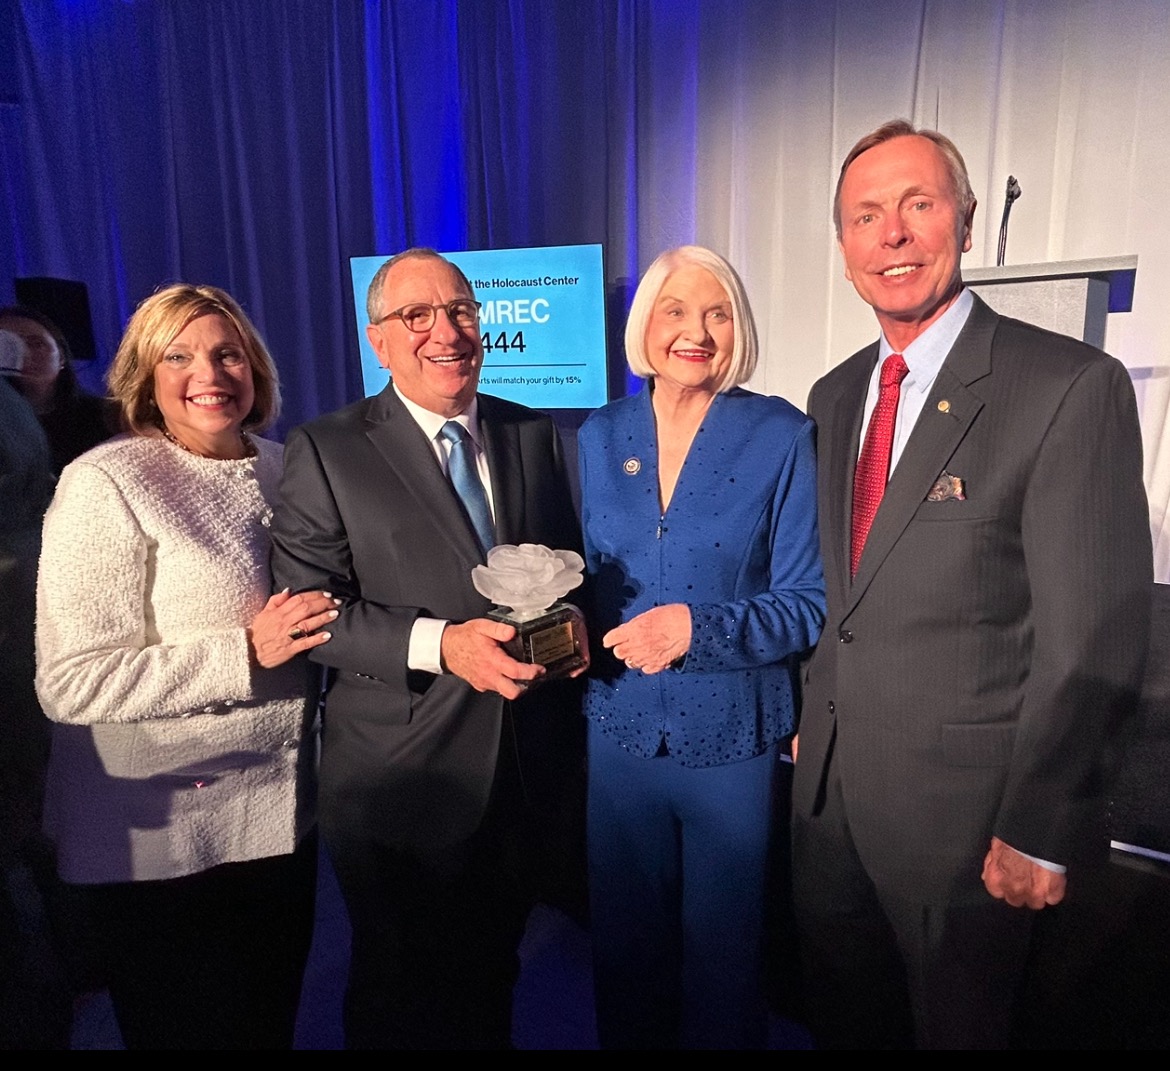 My friends Jonathan and Nancy Wolf received the White Rose award tonight for their fight against antisemitism. Humbled to be recognized with Senator Linda Stewart for our $5M appropriation project for the new Holocaust Museum.